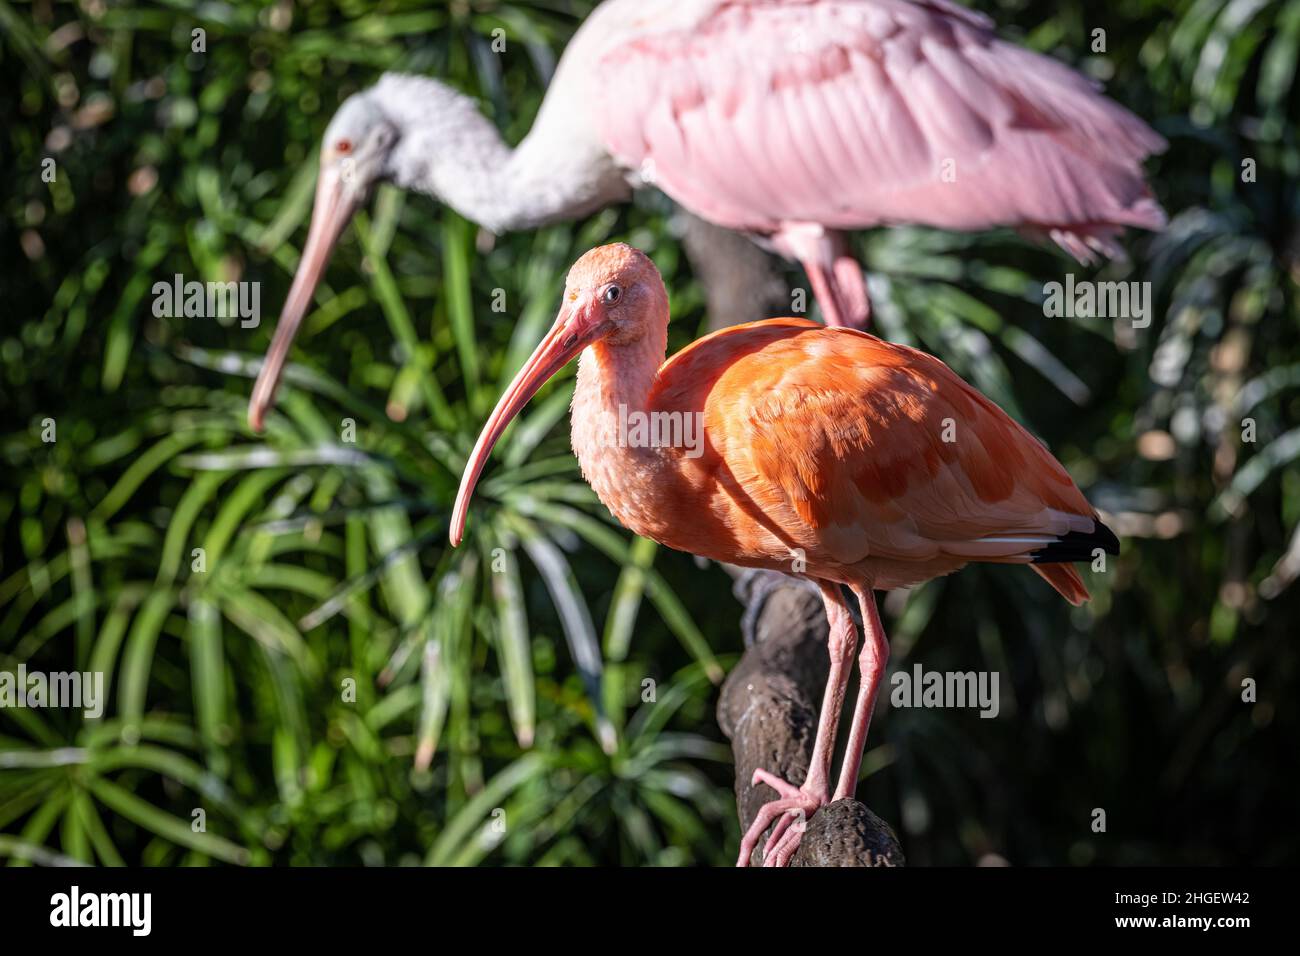 Scarlet ibis (Eudocimus ruber) and a roseate spoonbill (Platalea ajaja) at Jacksonville Zoo and Gardens in Jacksonville, Florida. (USA) Stock Photo